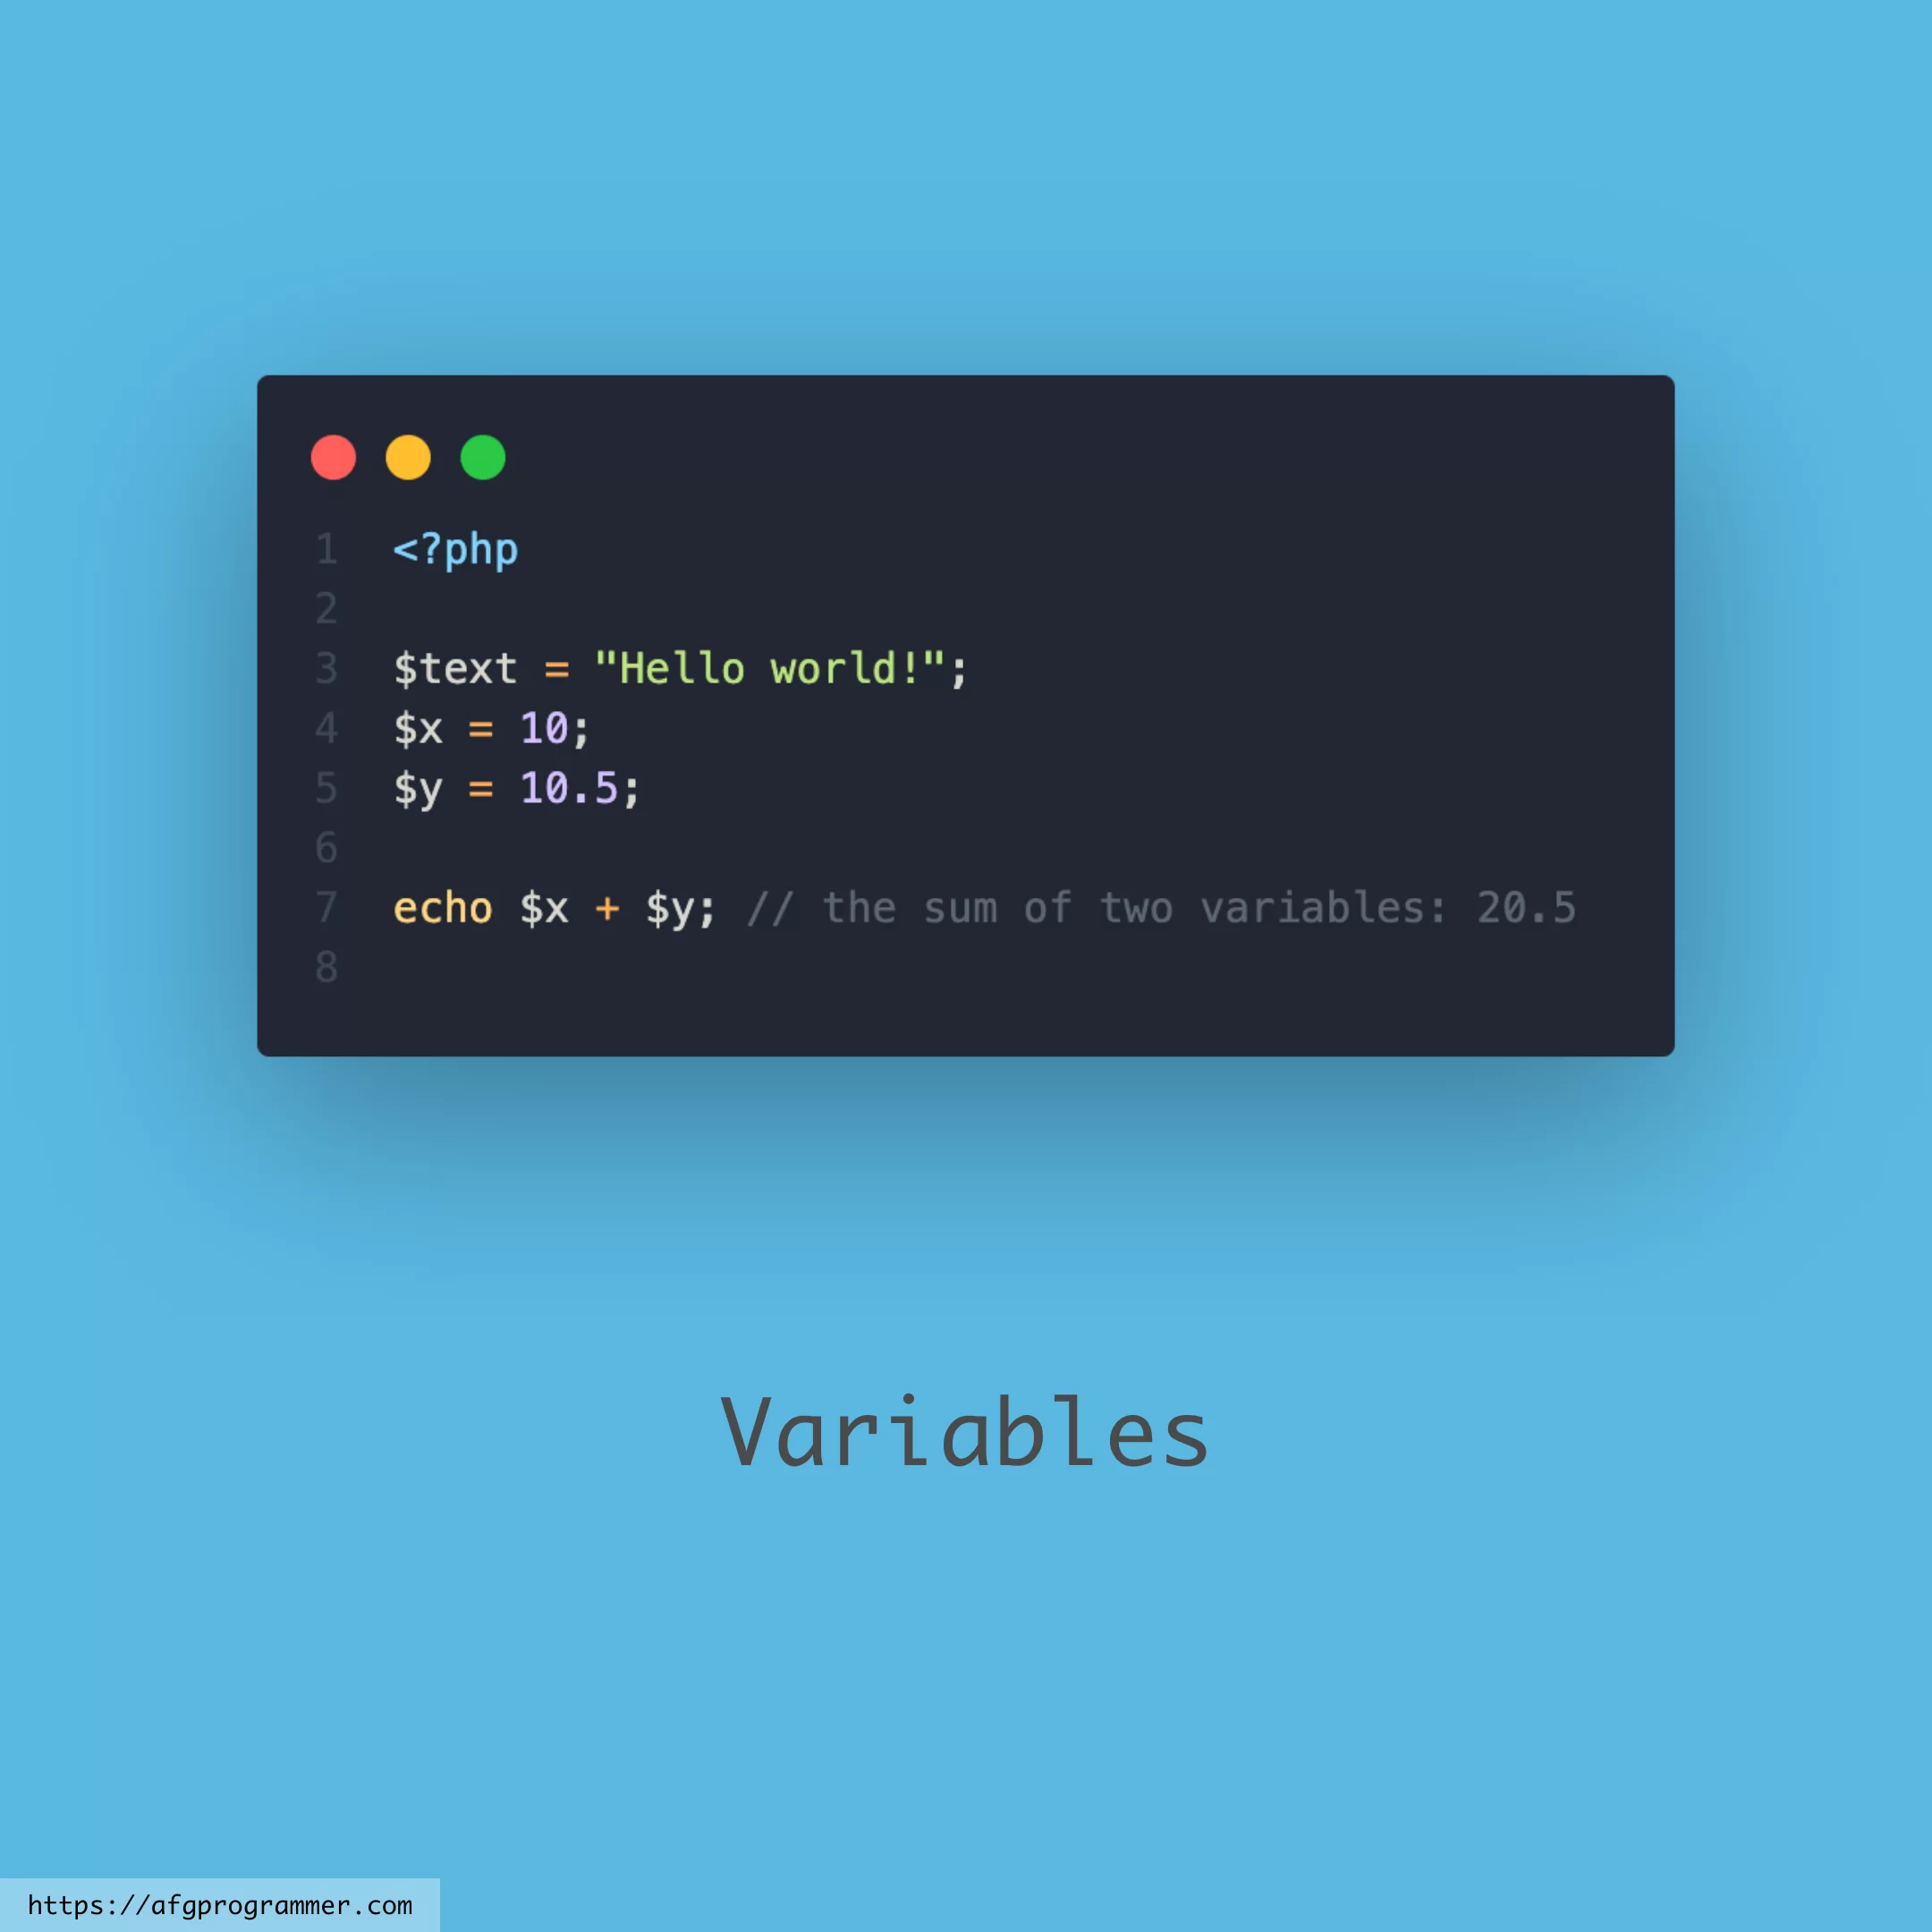 Types of variables in PHP